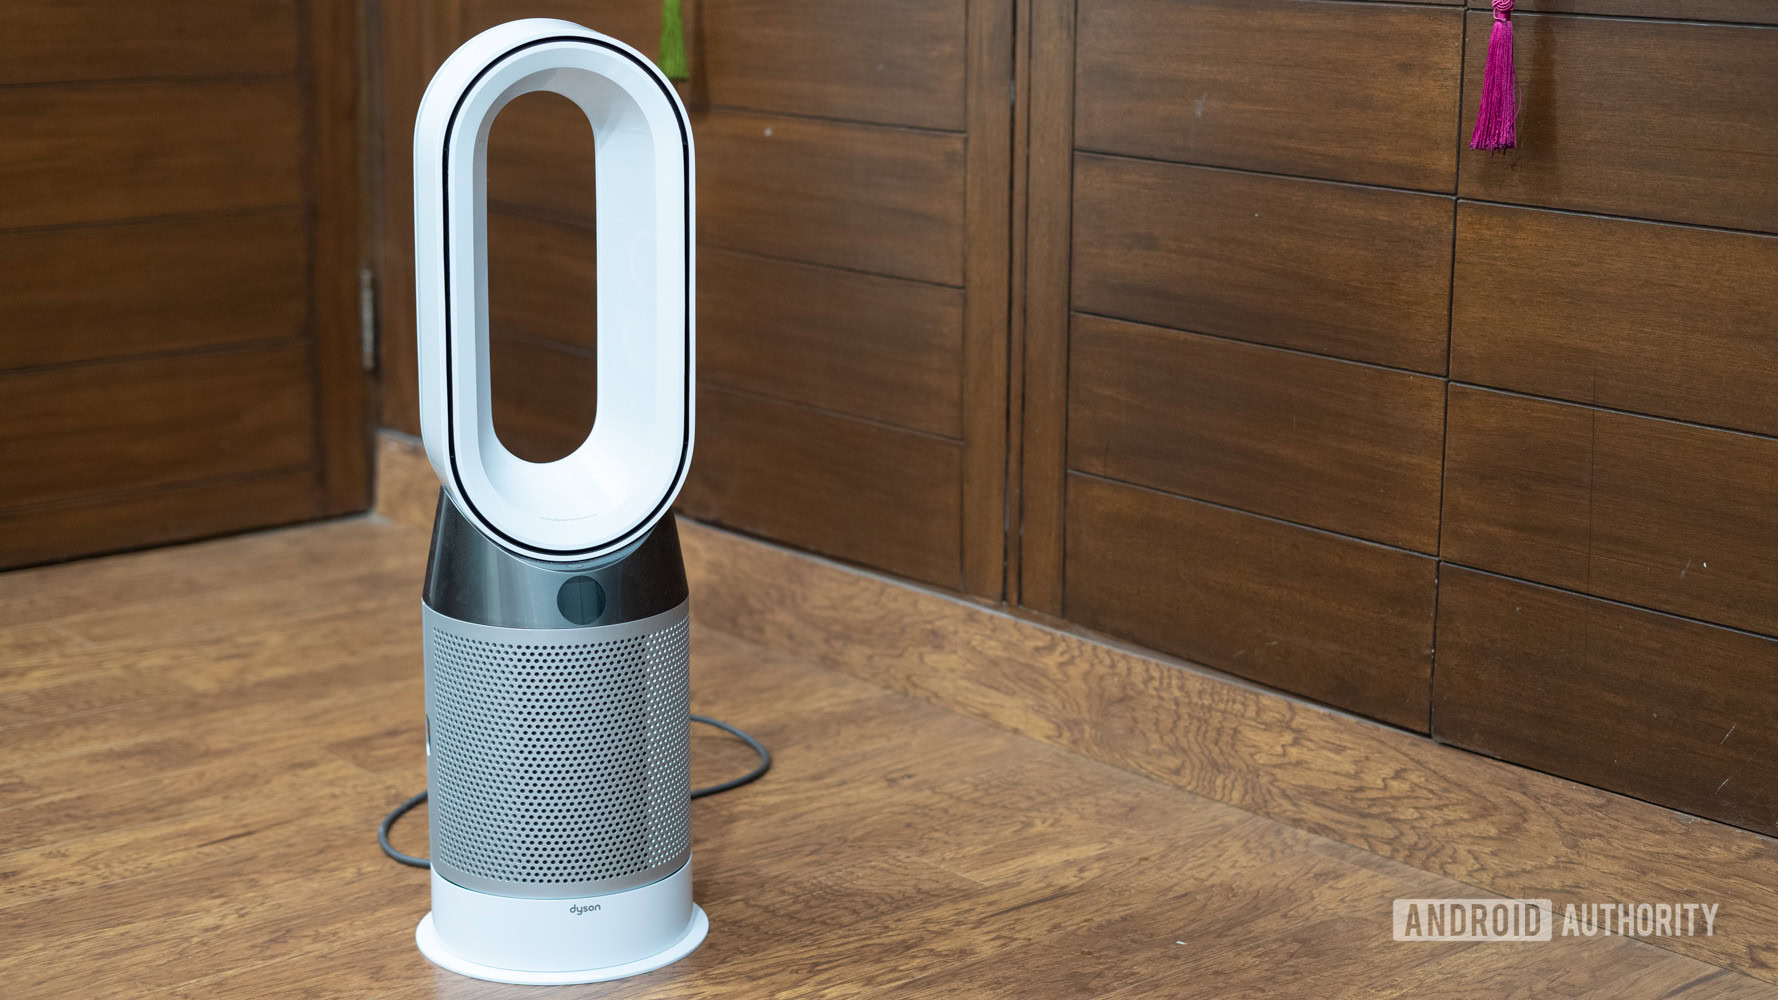 Smart air purifier review (Levoit LV-PUR131S): Clean air and peace